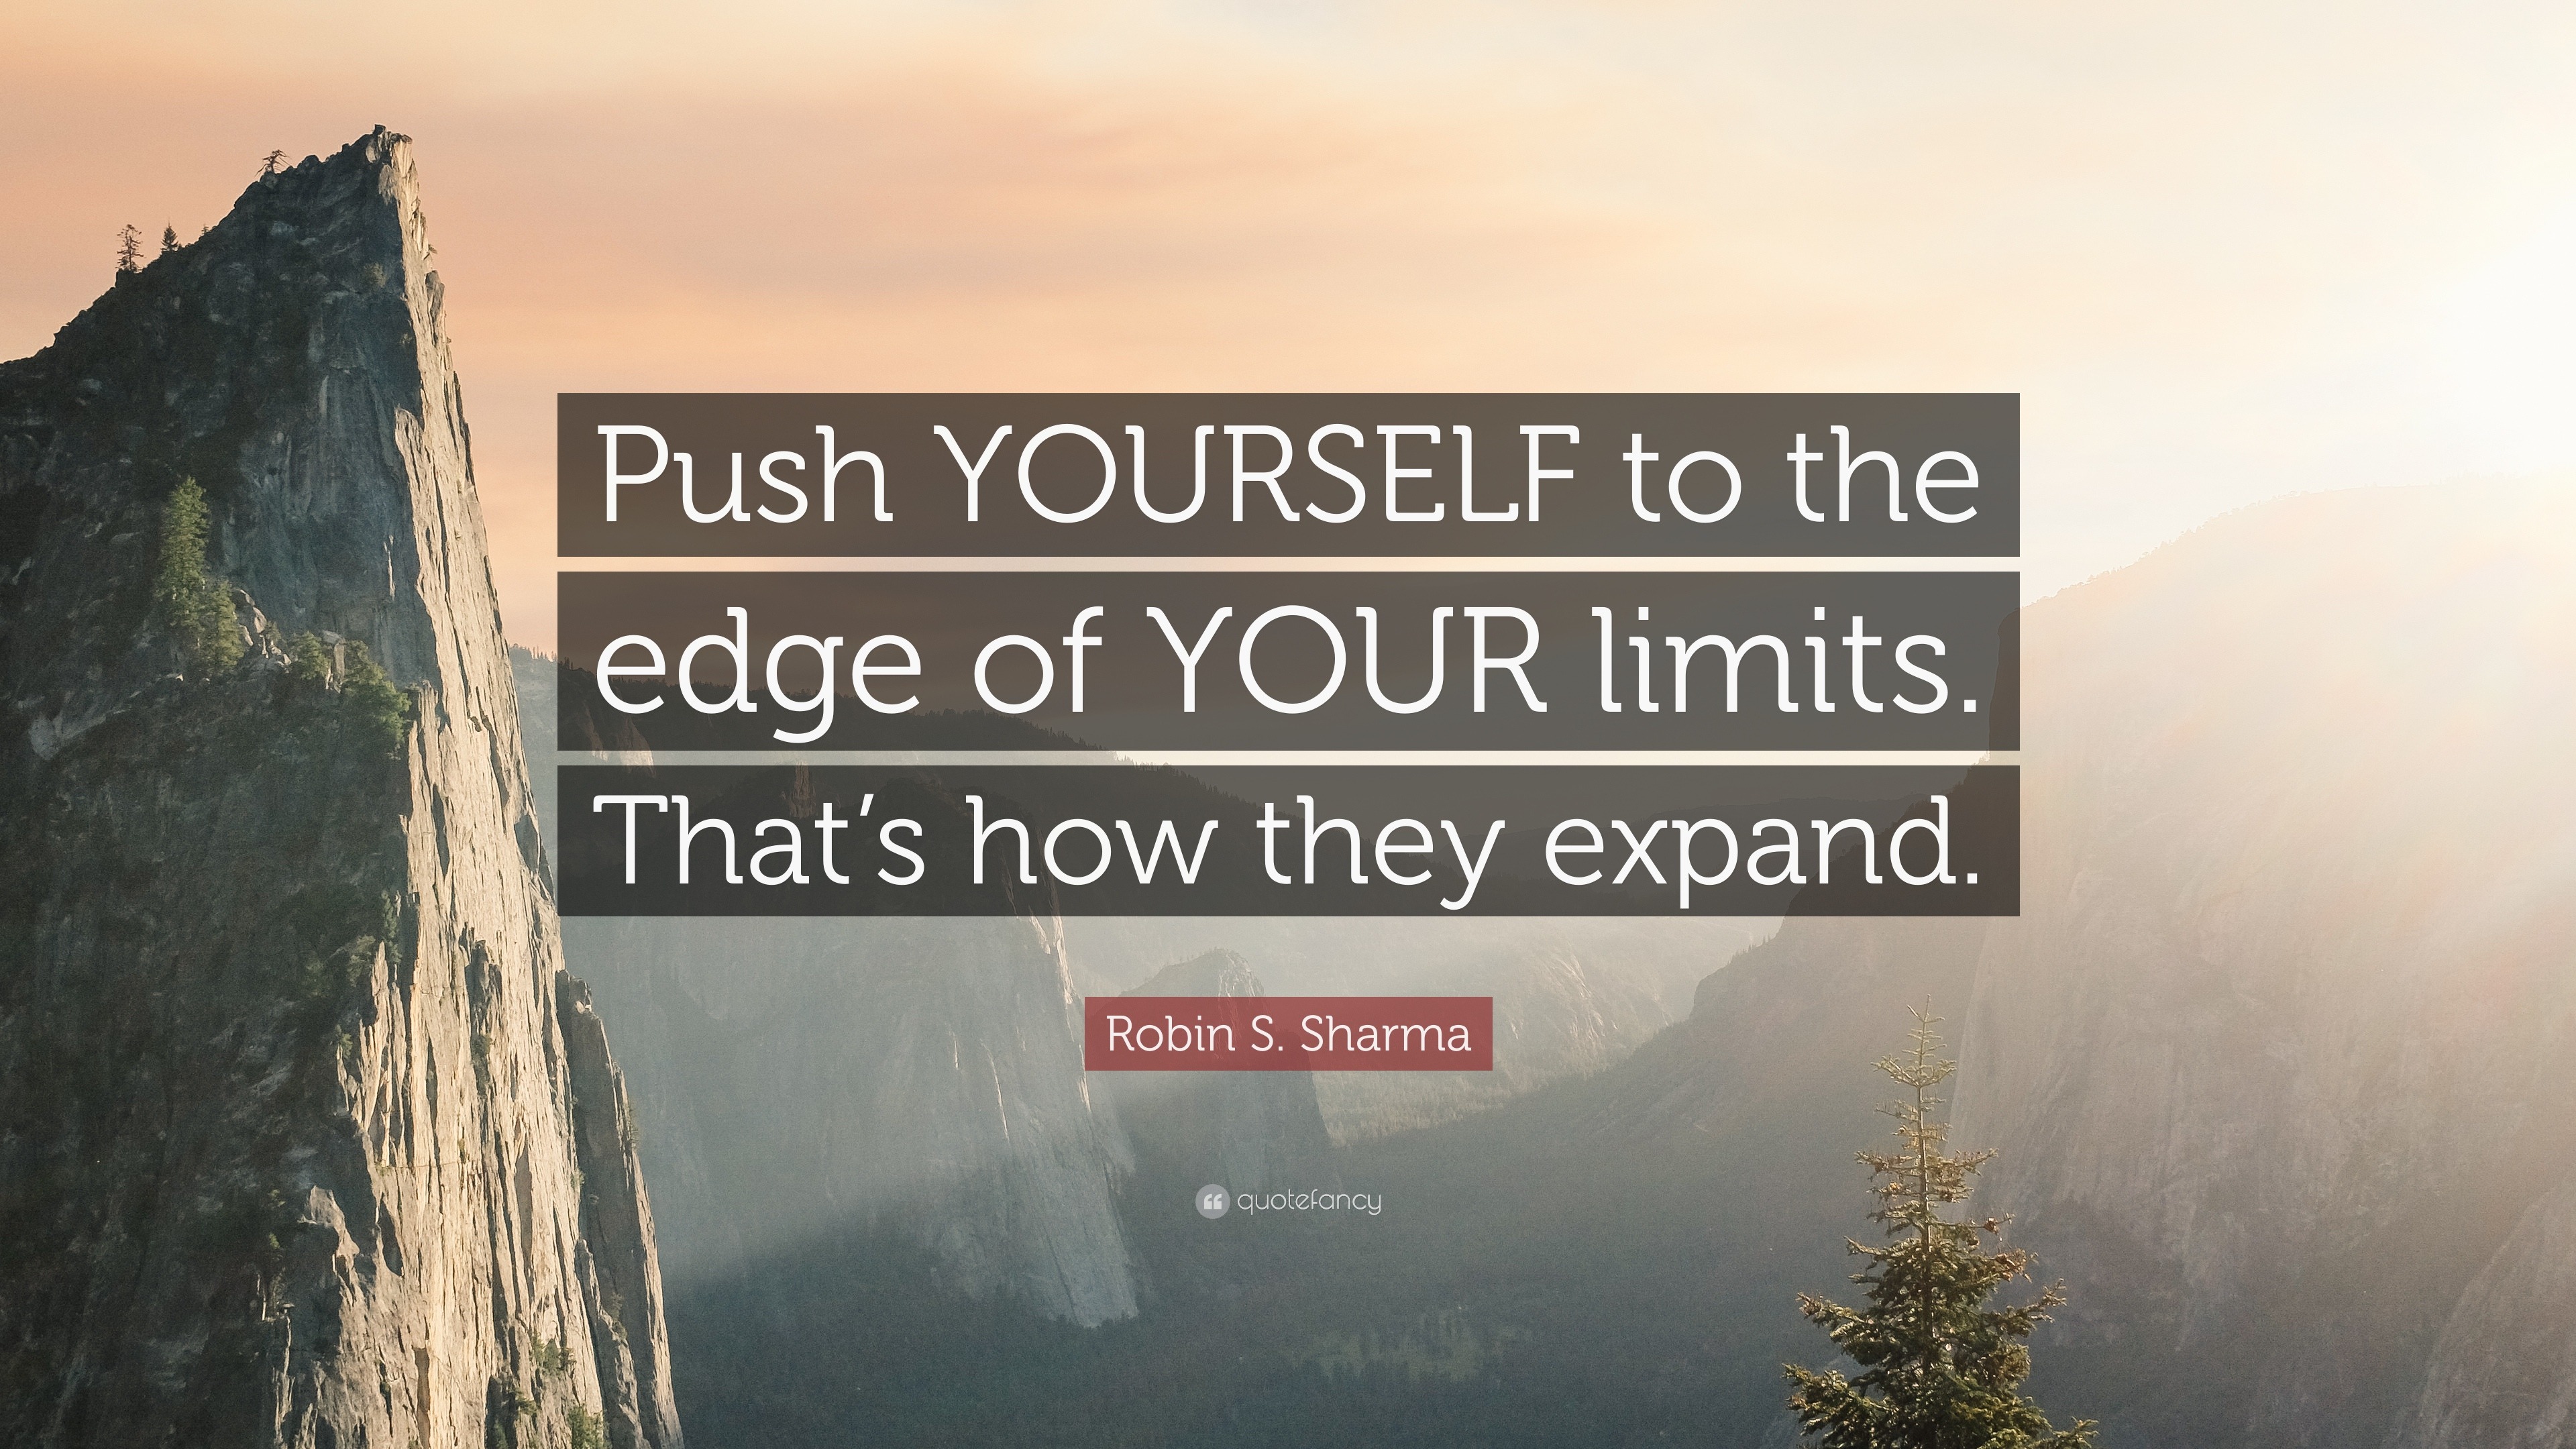 184270 Robin S Sharma Quote Push YOURSELF to the edge of YOUR limits That